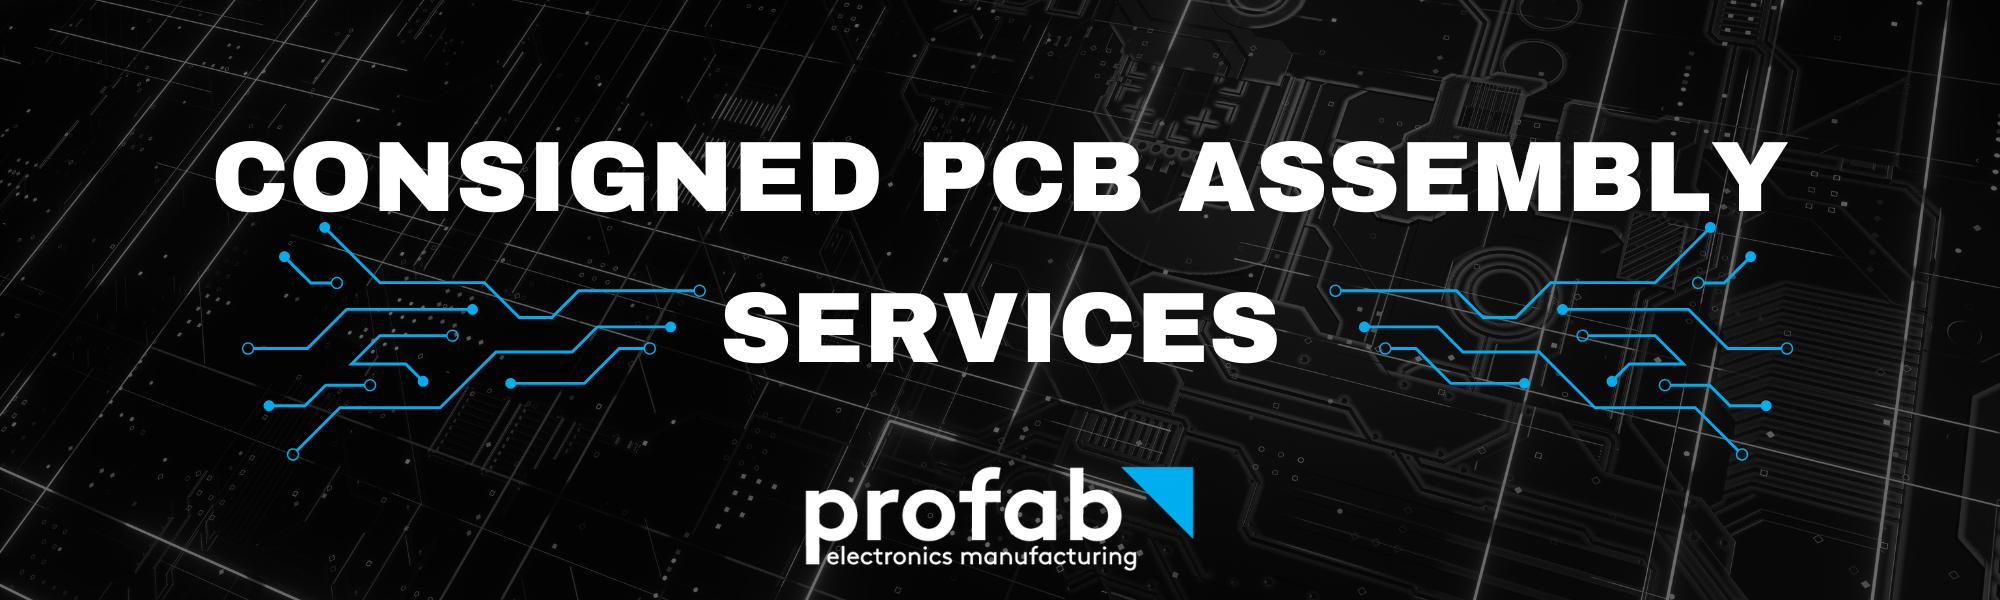 Consigned PCB Assembly Services